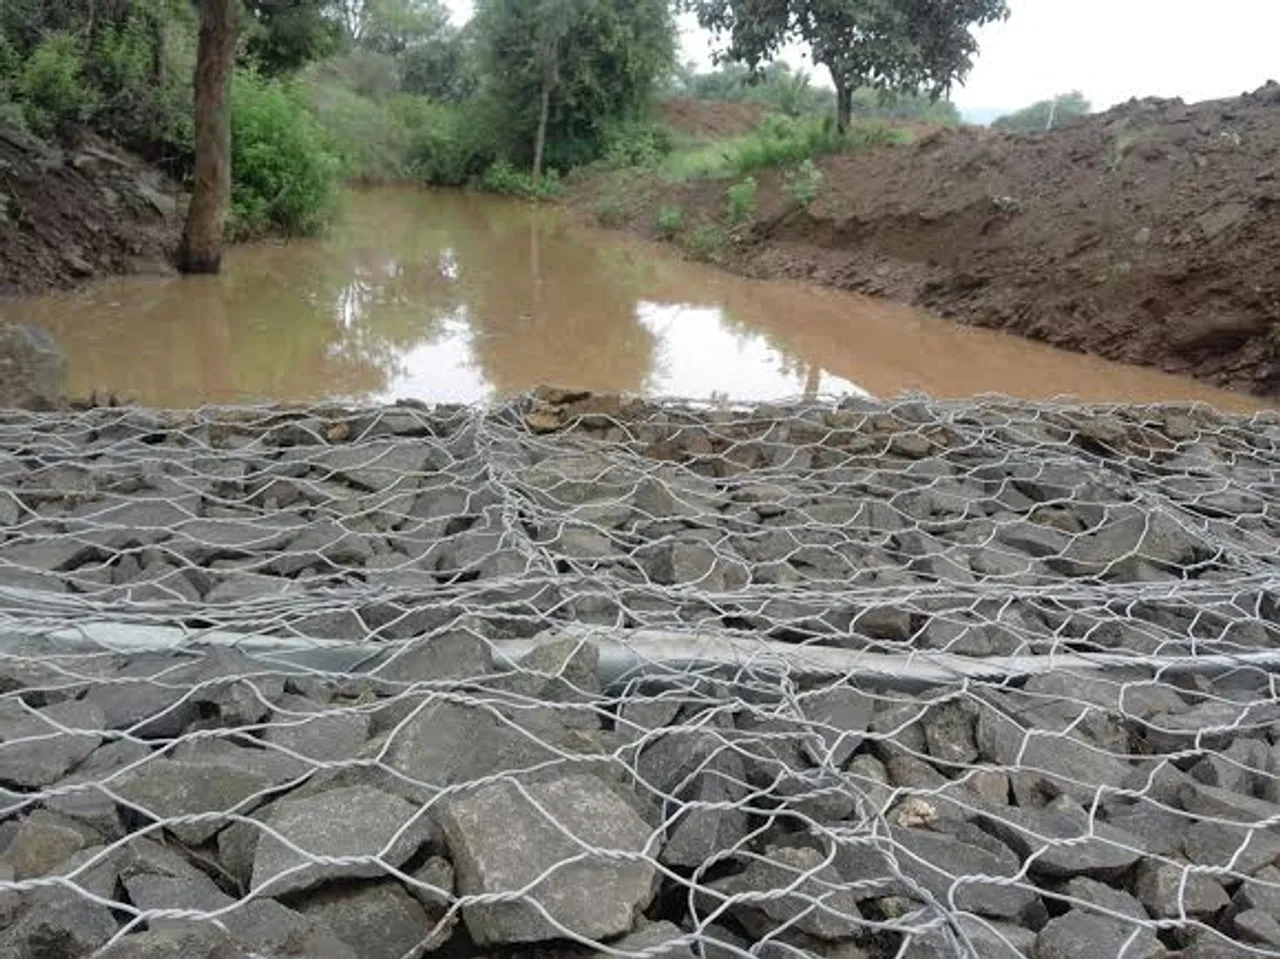 Garware-Wall Ropes Builds Check Dam For Village To Conserve Rain Water